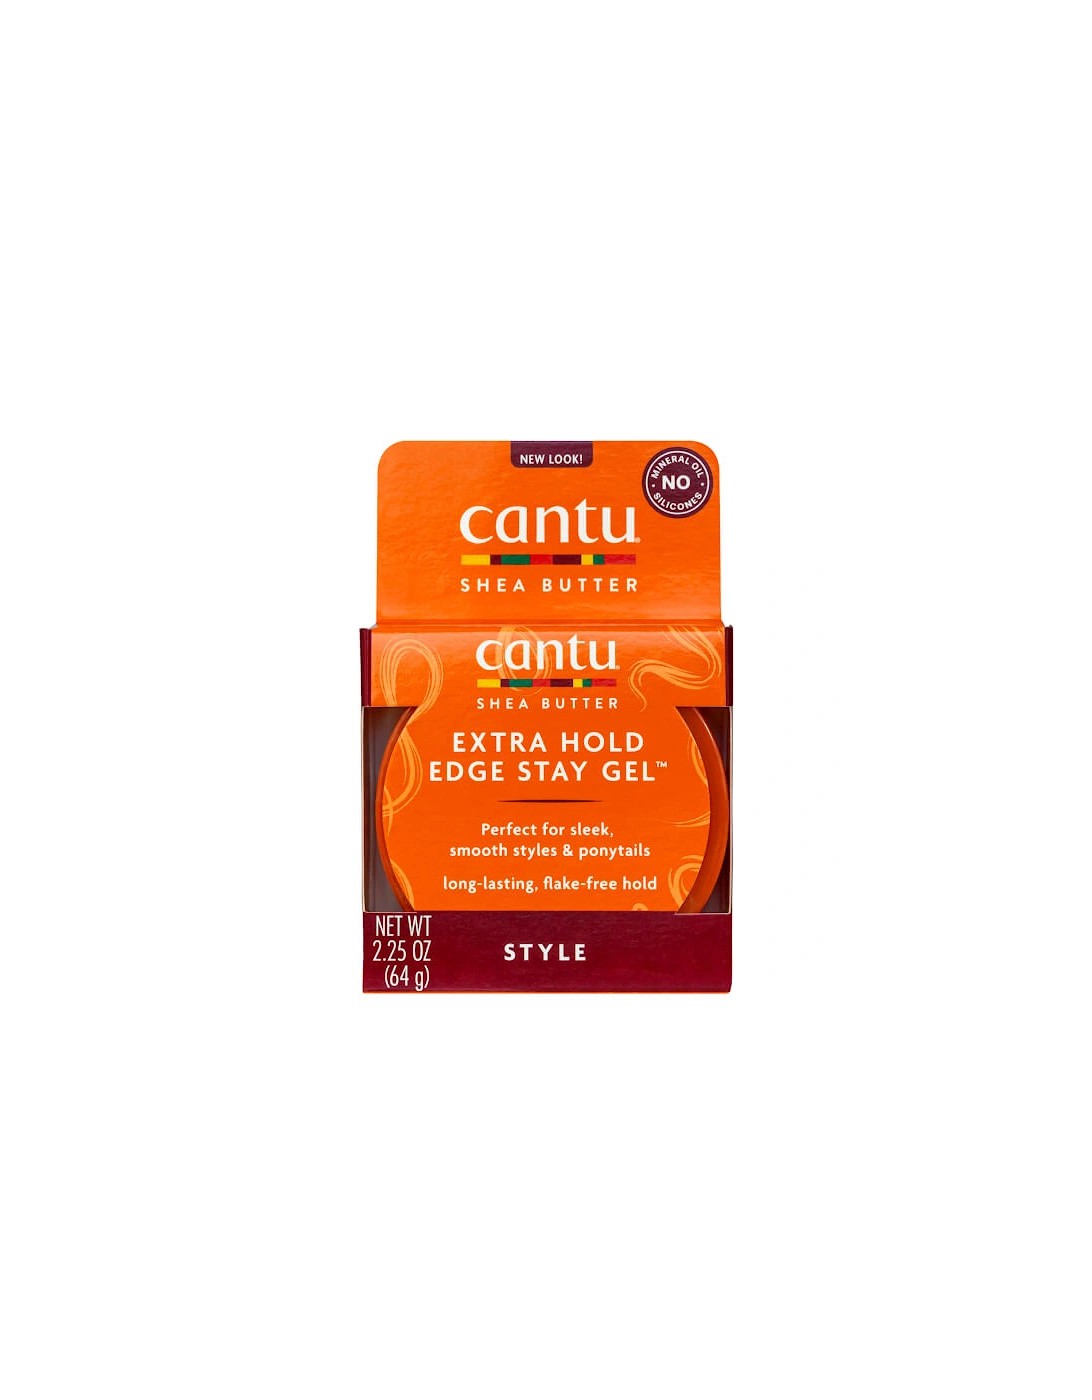 Shea Butter for Natural Hair Extra Hold Edge Stay Gel - Cantu, 2 of 1